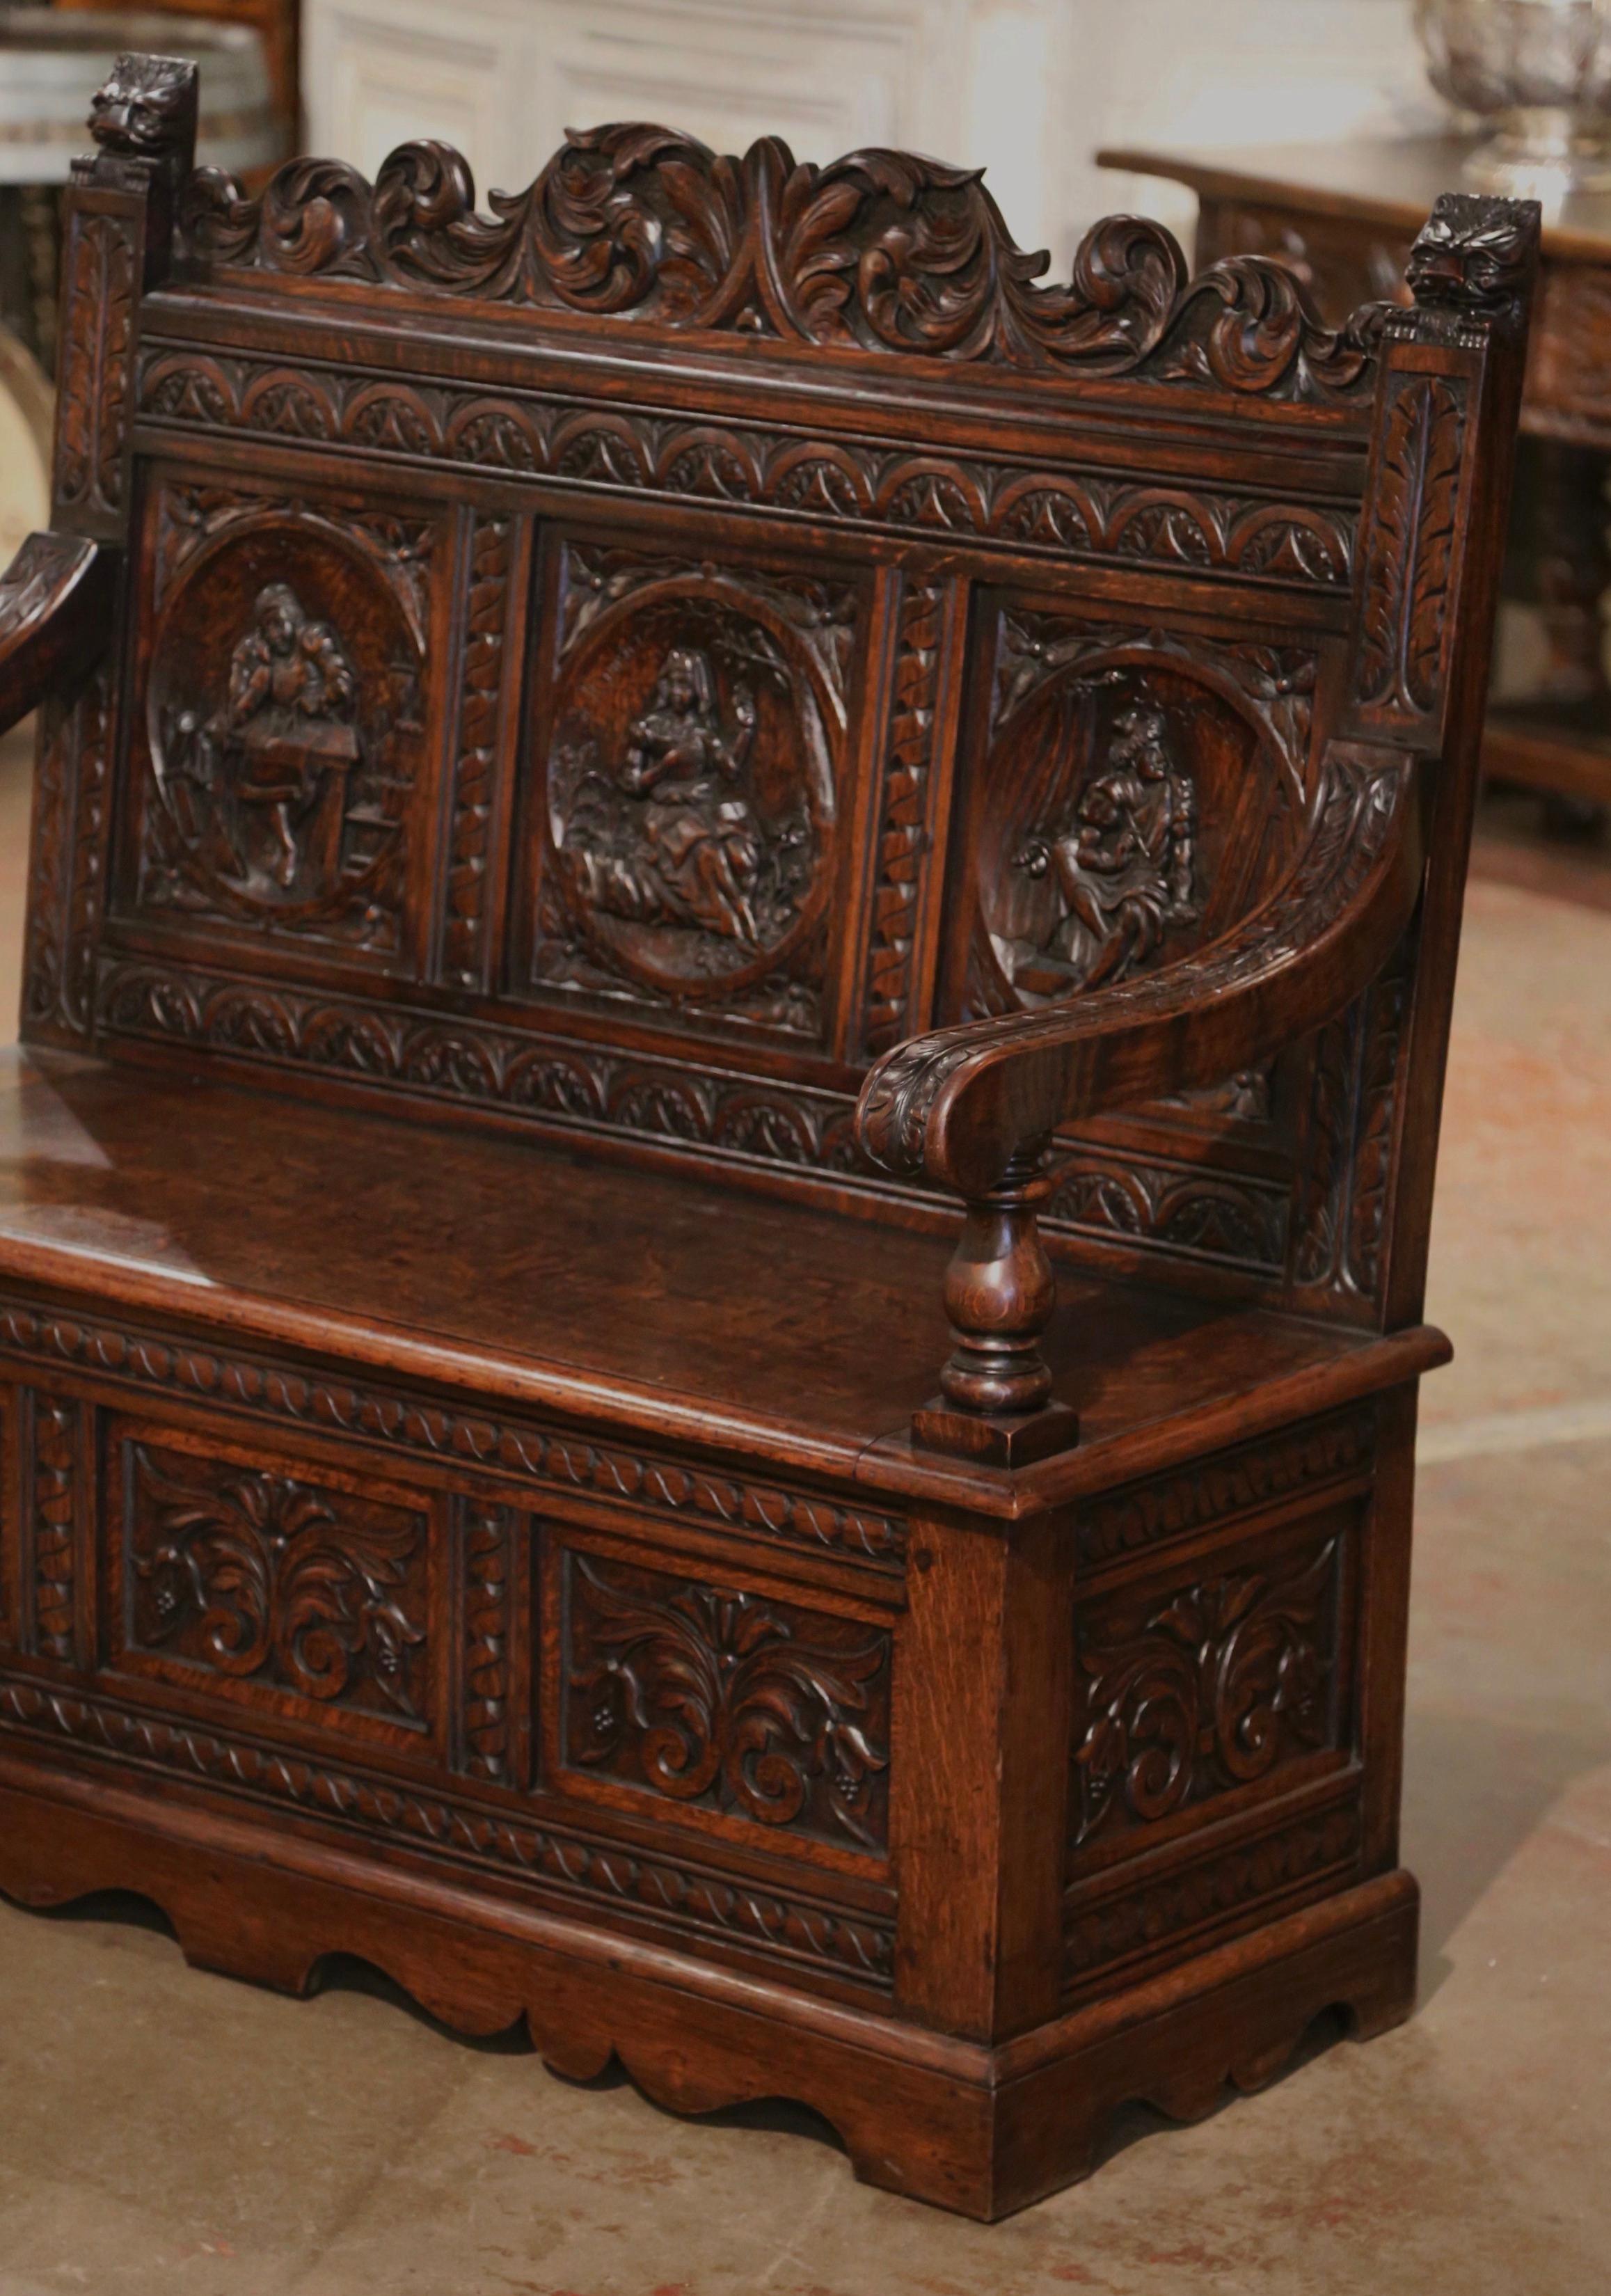 19th Century French Renaissance Carved Oak Bench with Figural Motifs In Excellent Condition For Sale In Dallas, TX